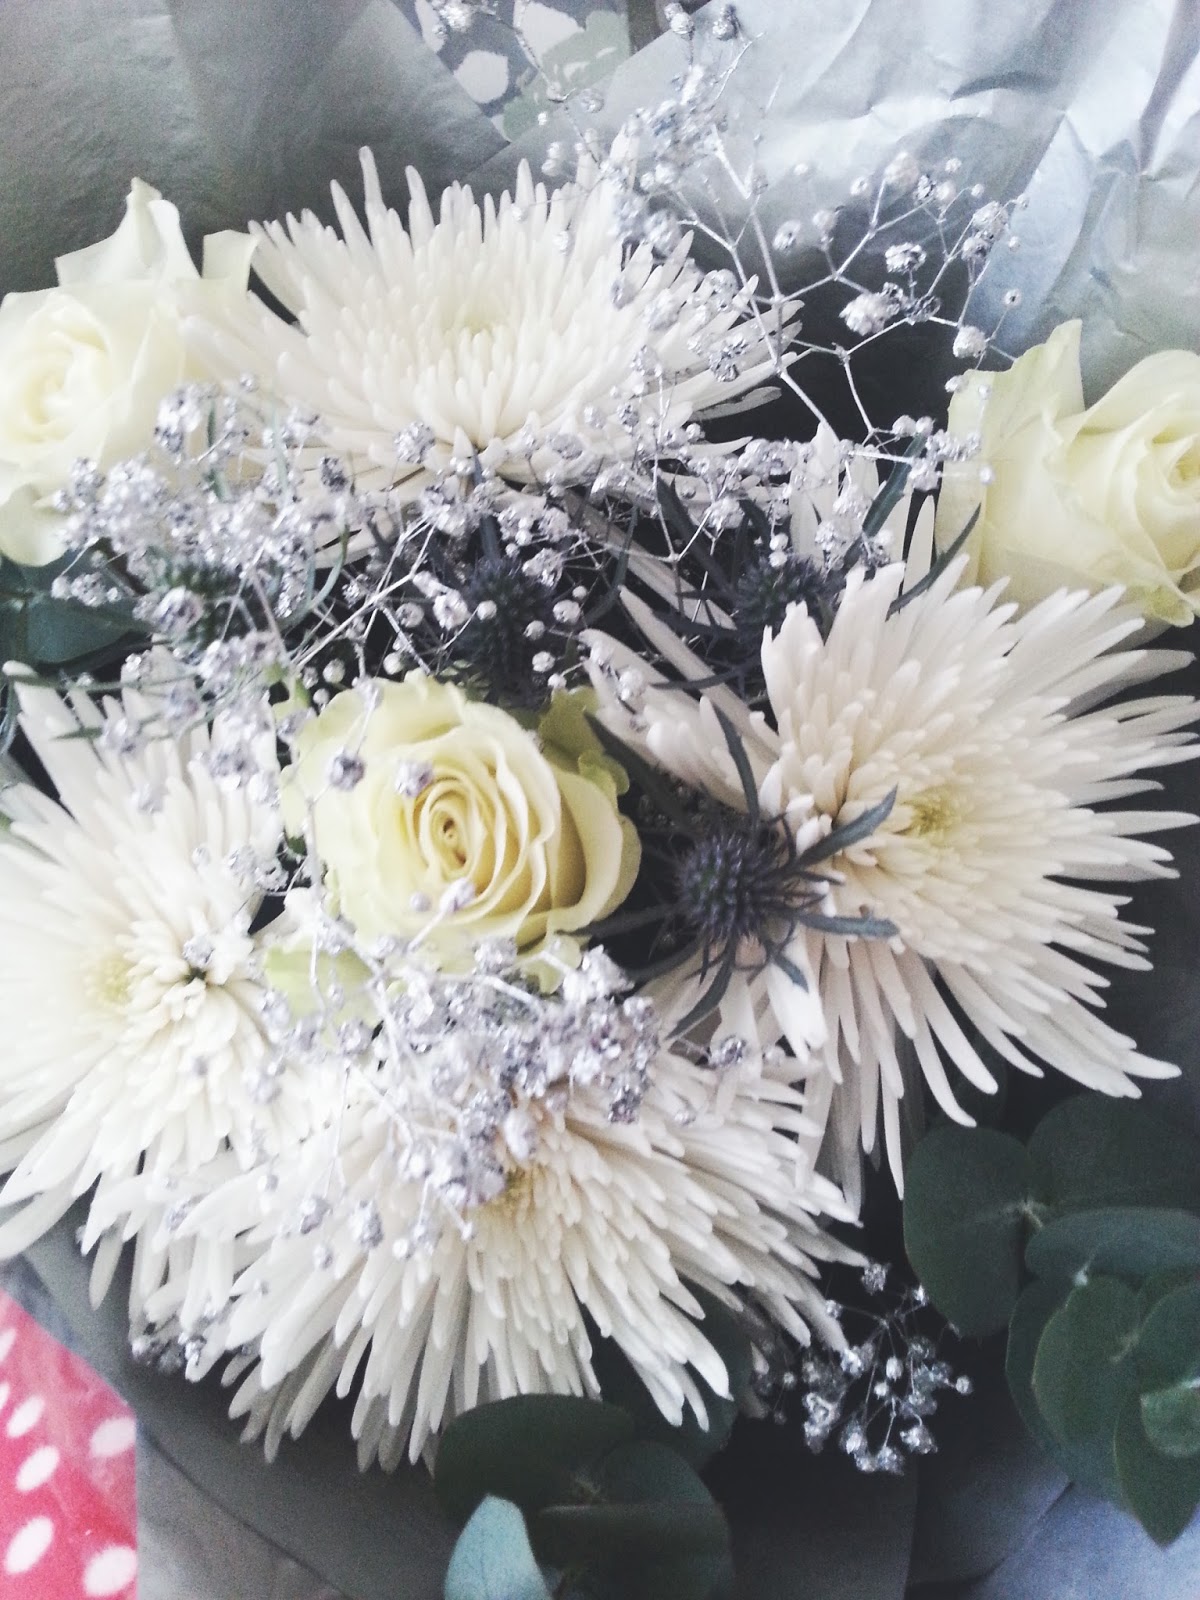 Jack Frost Bouquet from Floric